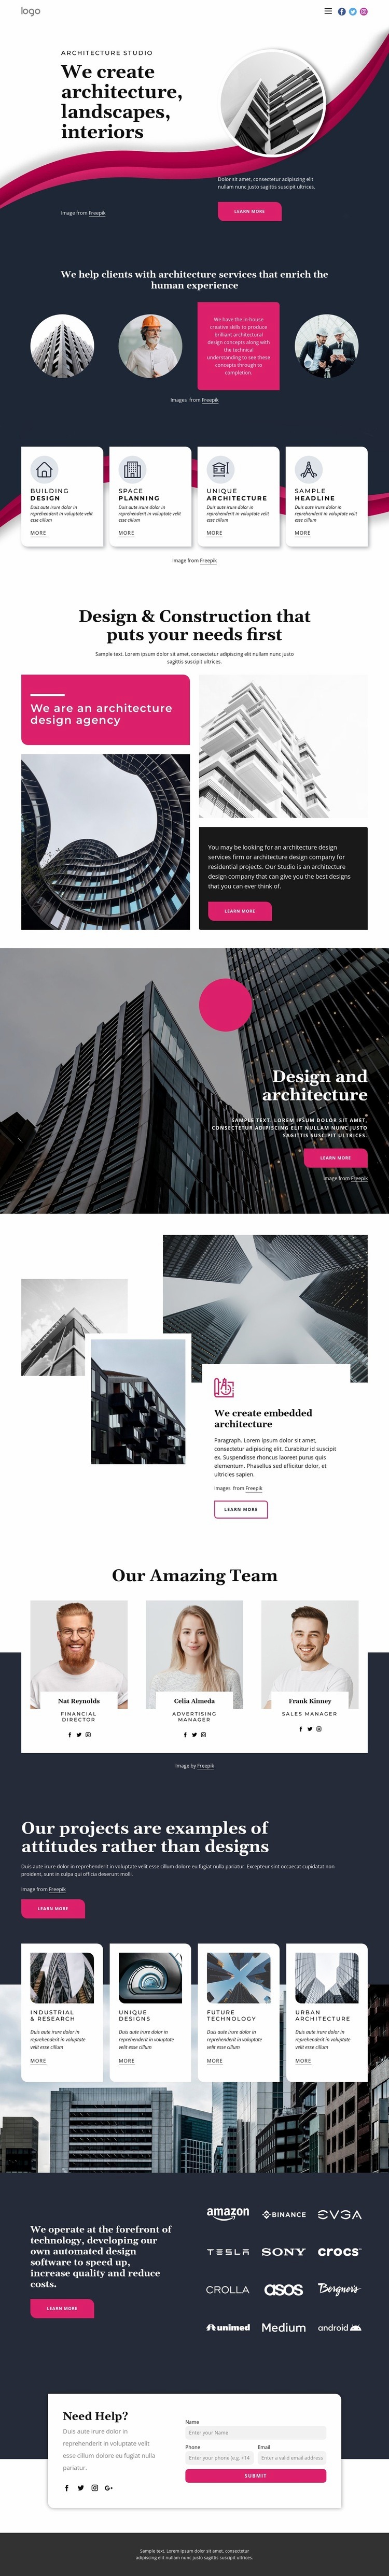 We create great architecture Homepage Design